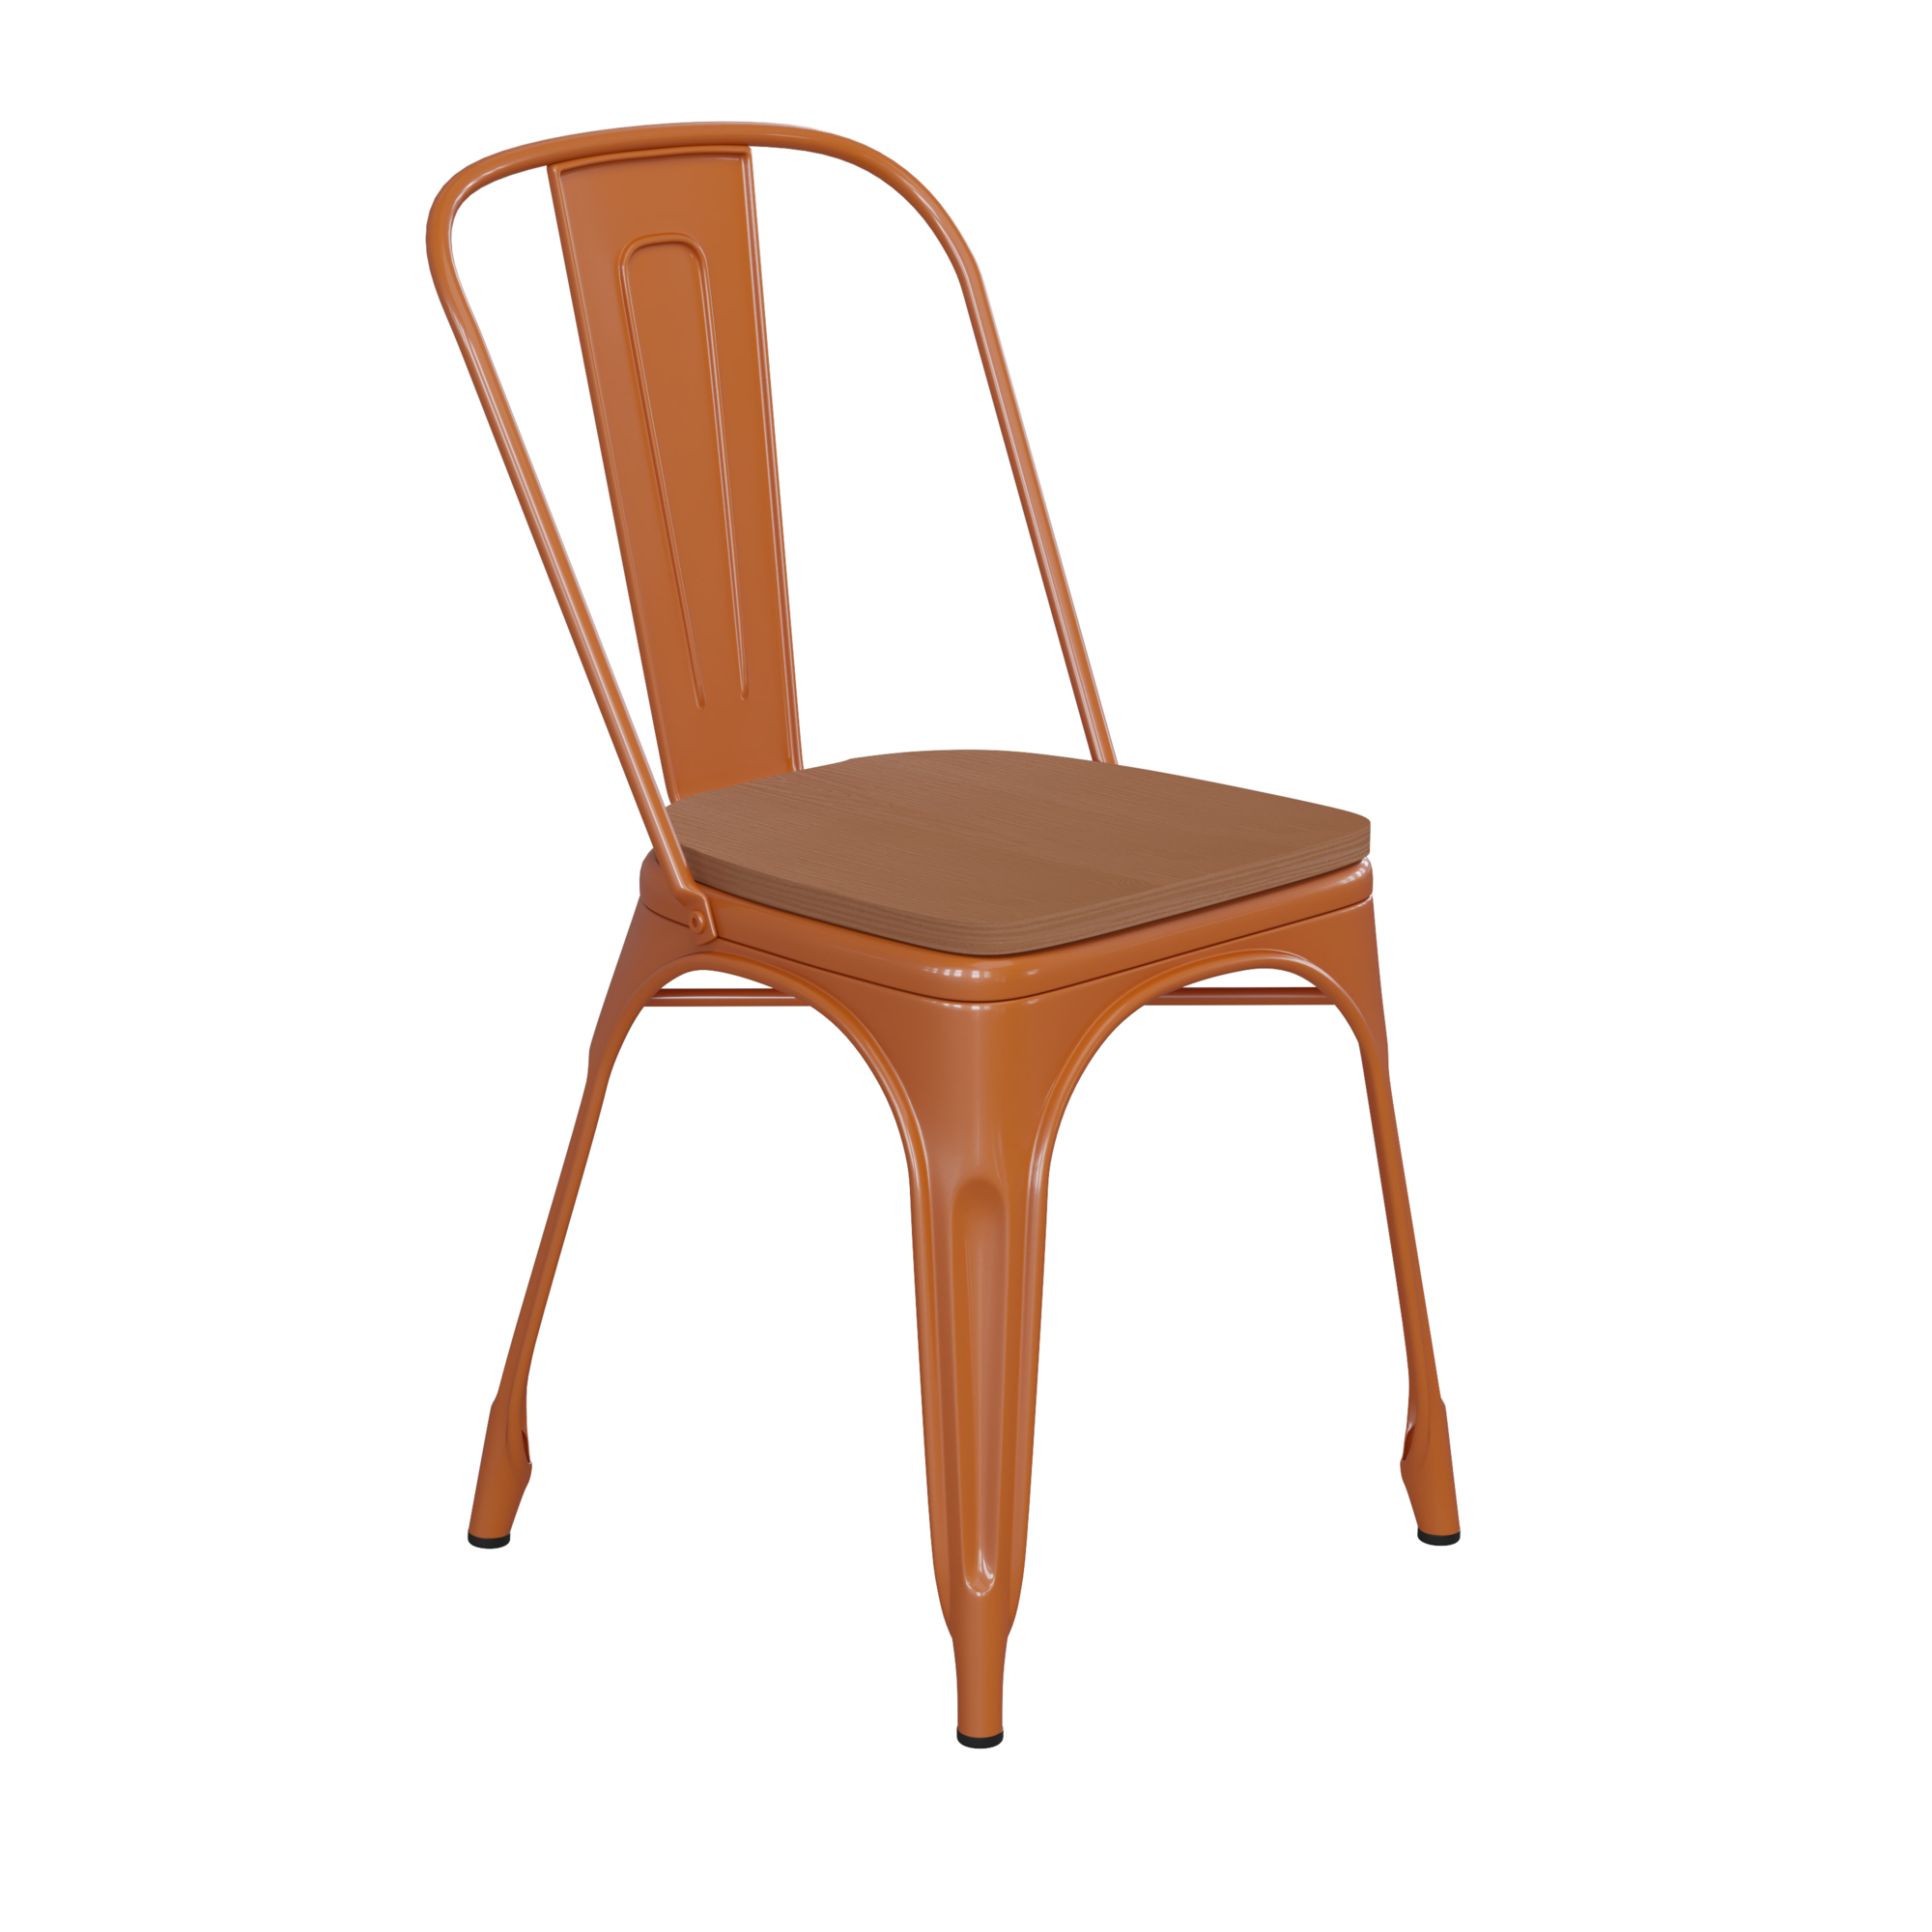 Flash Furniture, Orange Metal Stack Chair with Teak Poly Resin Seat, Primary Color Orange, Included (qty.) 1, Model CH31230ORPL1T